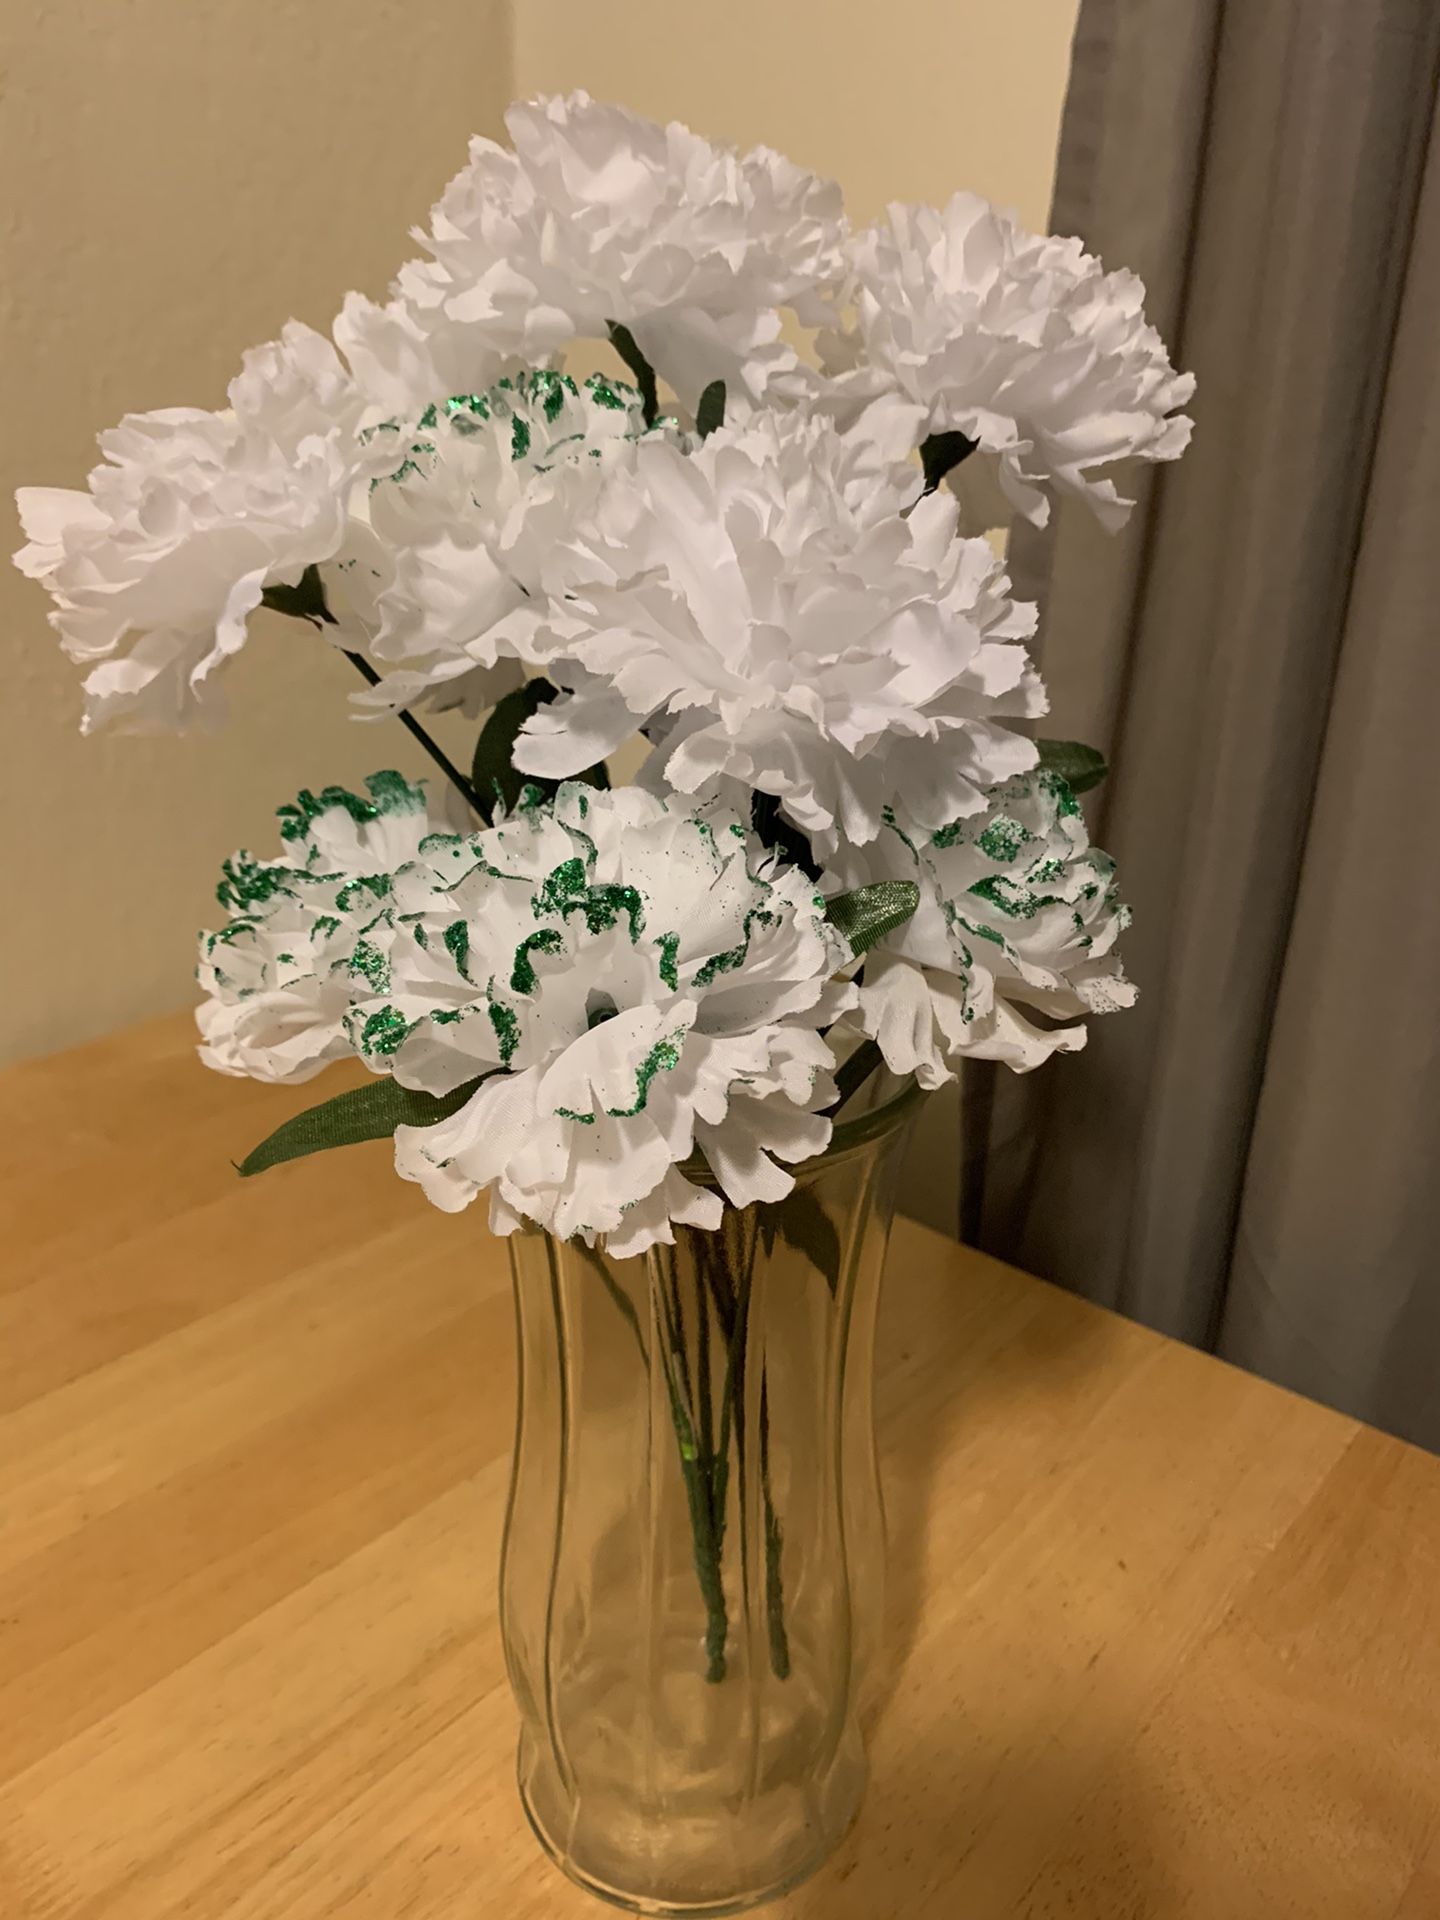 Artificial flowers in a vase